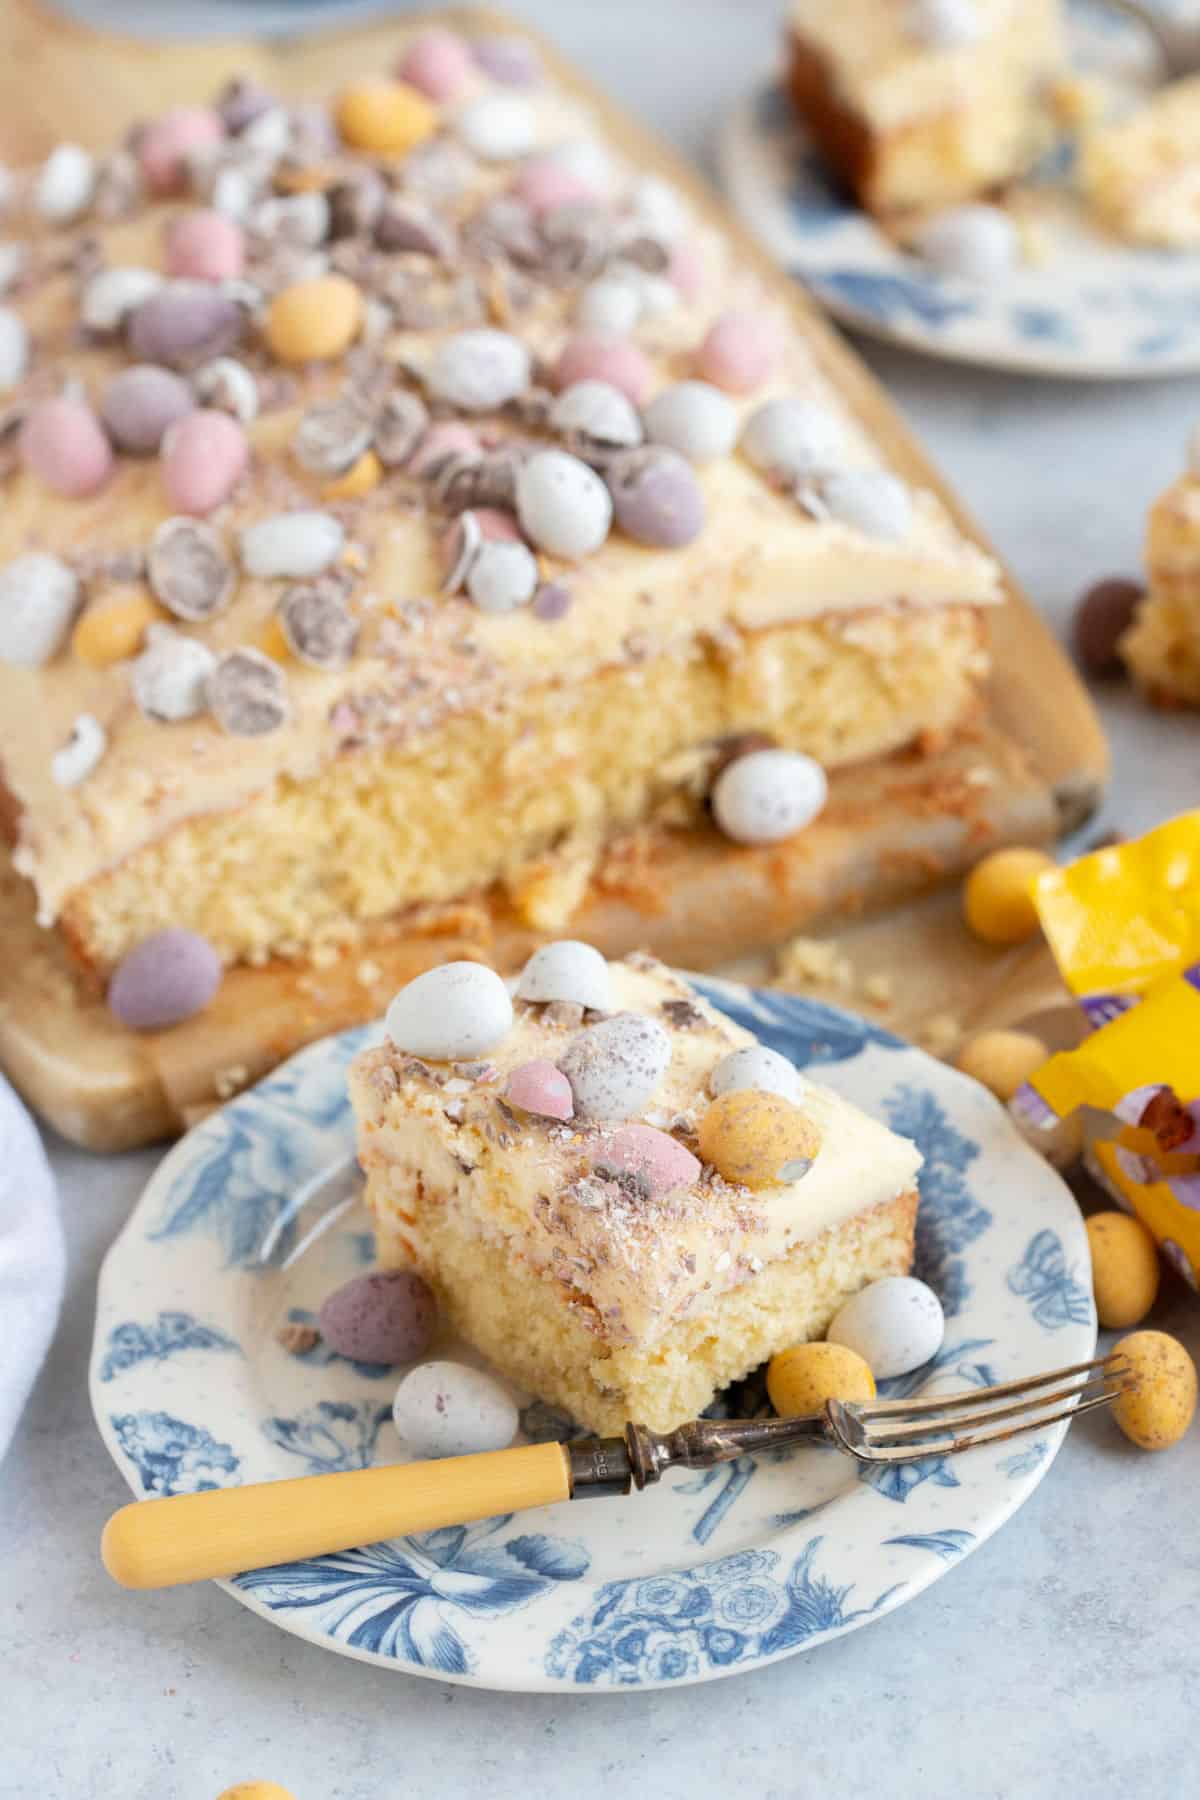 A slice of Easter mini egg traybake cake on a blue and white plate.